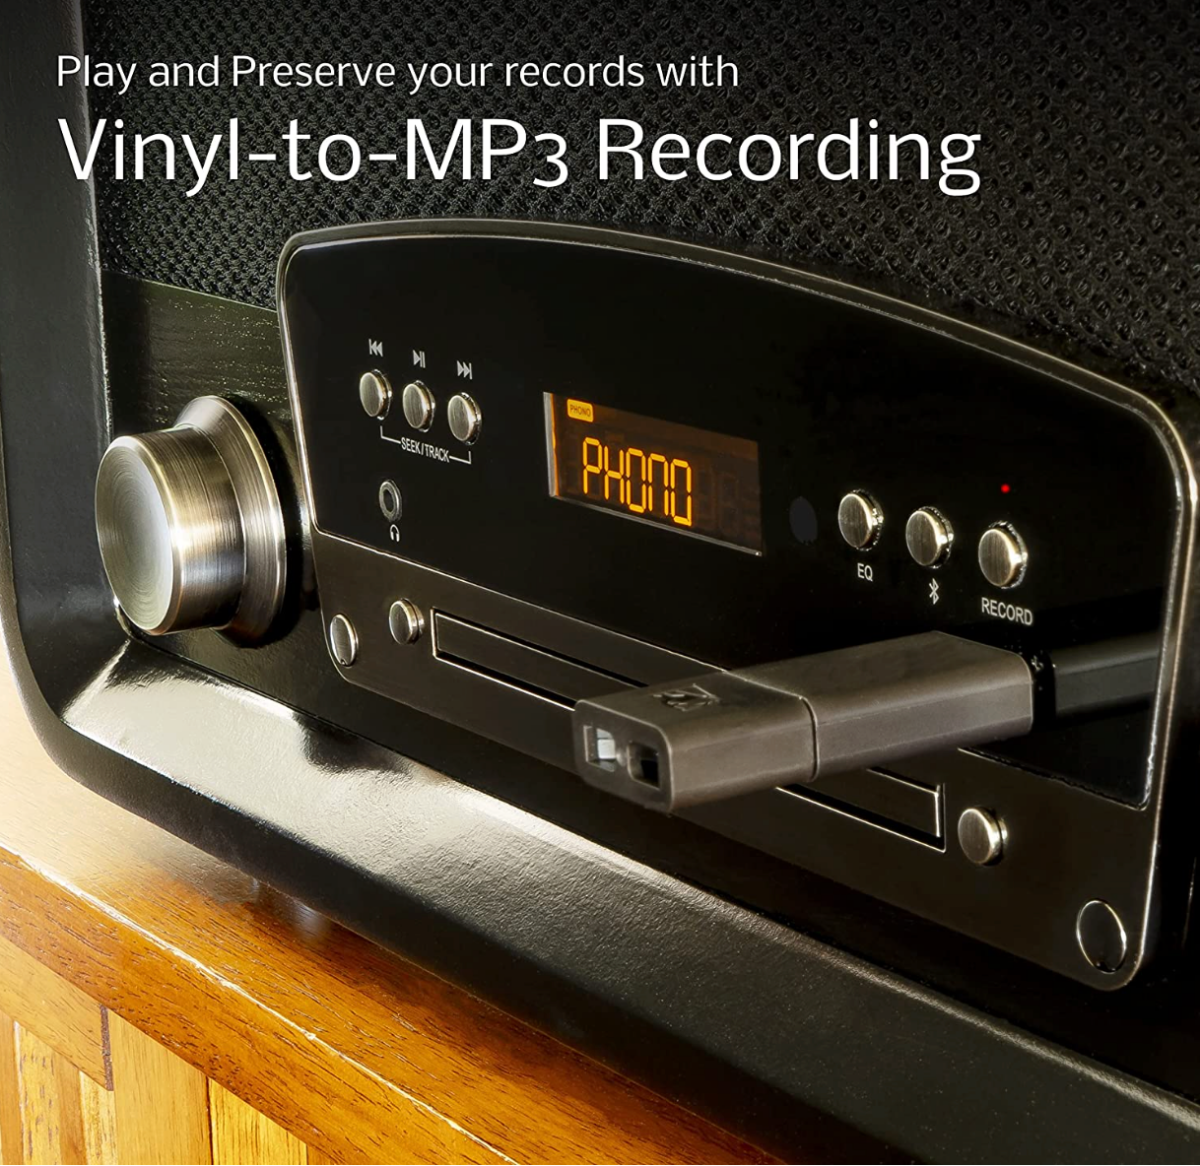 An image demostrating the Electrohome Kingston 7-in-1 Record Player's vinyl-to-MP3 recording ability